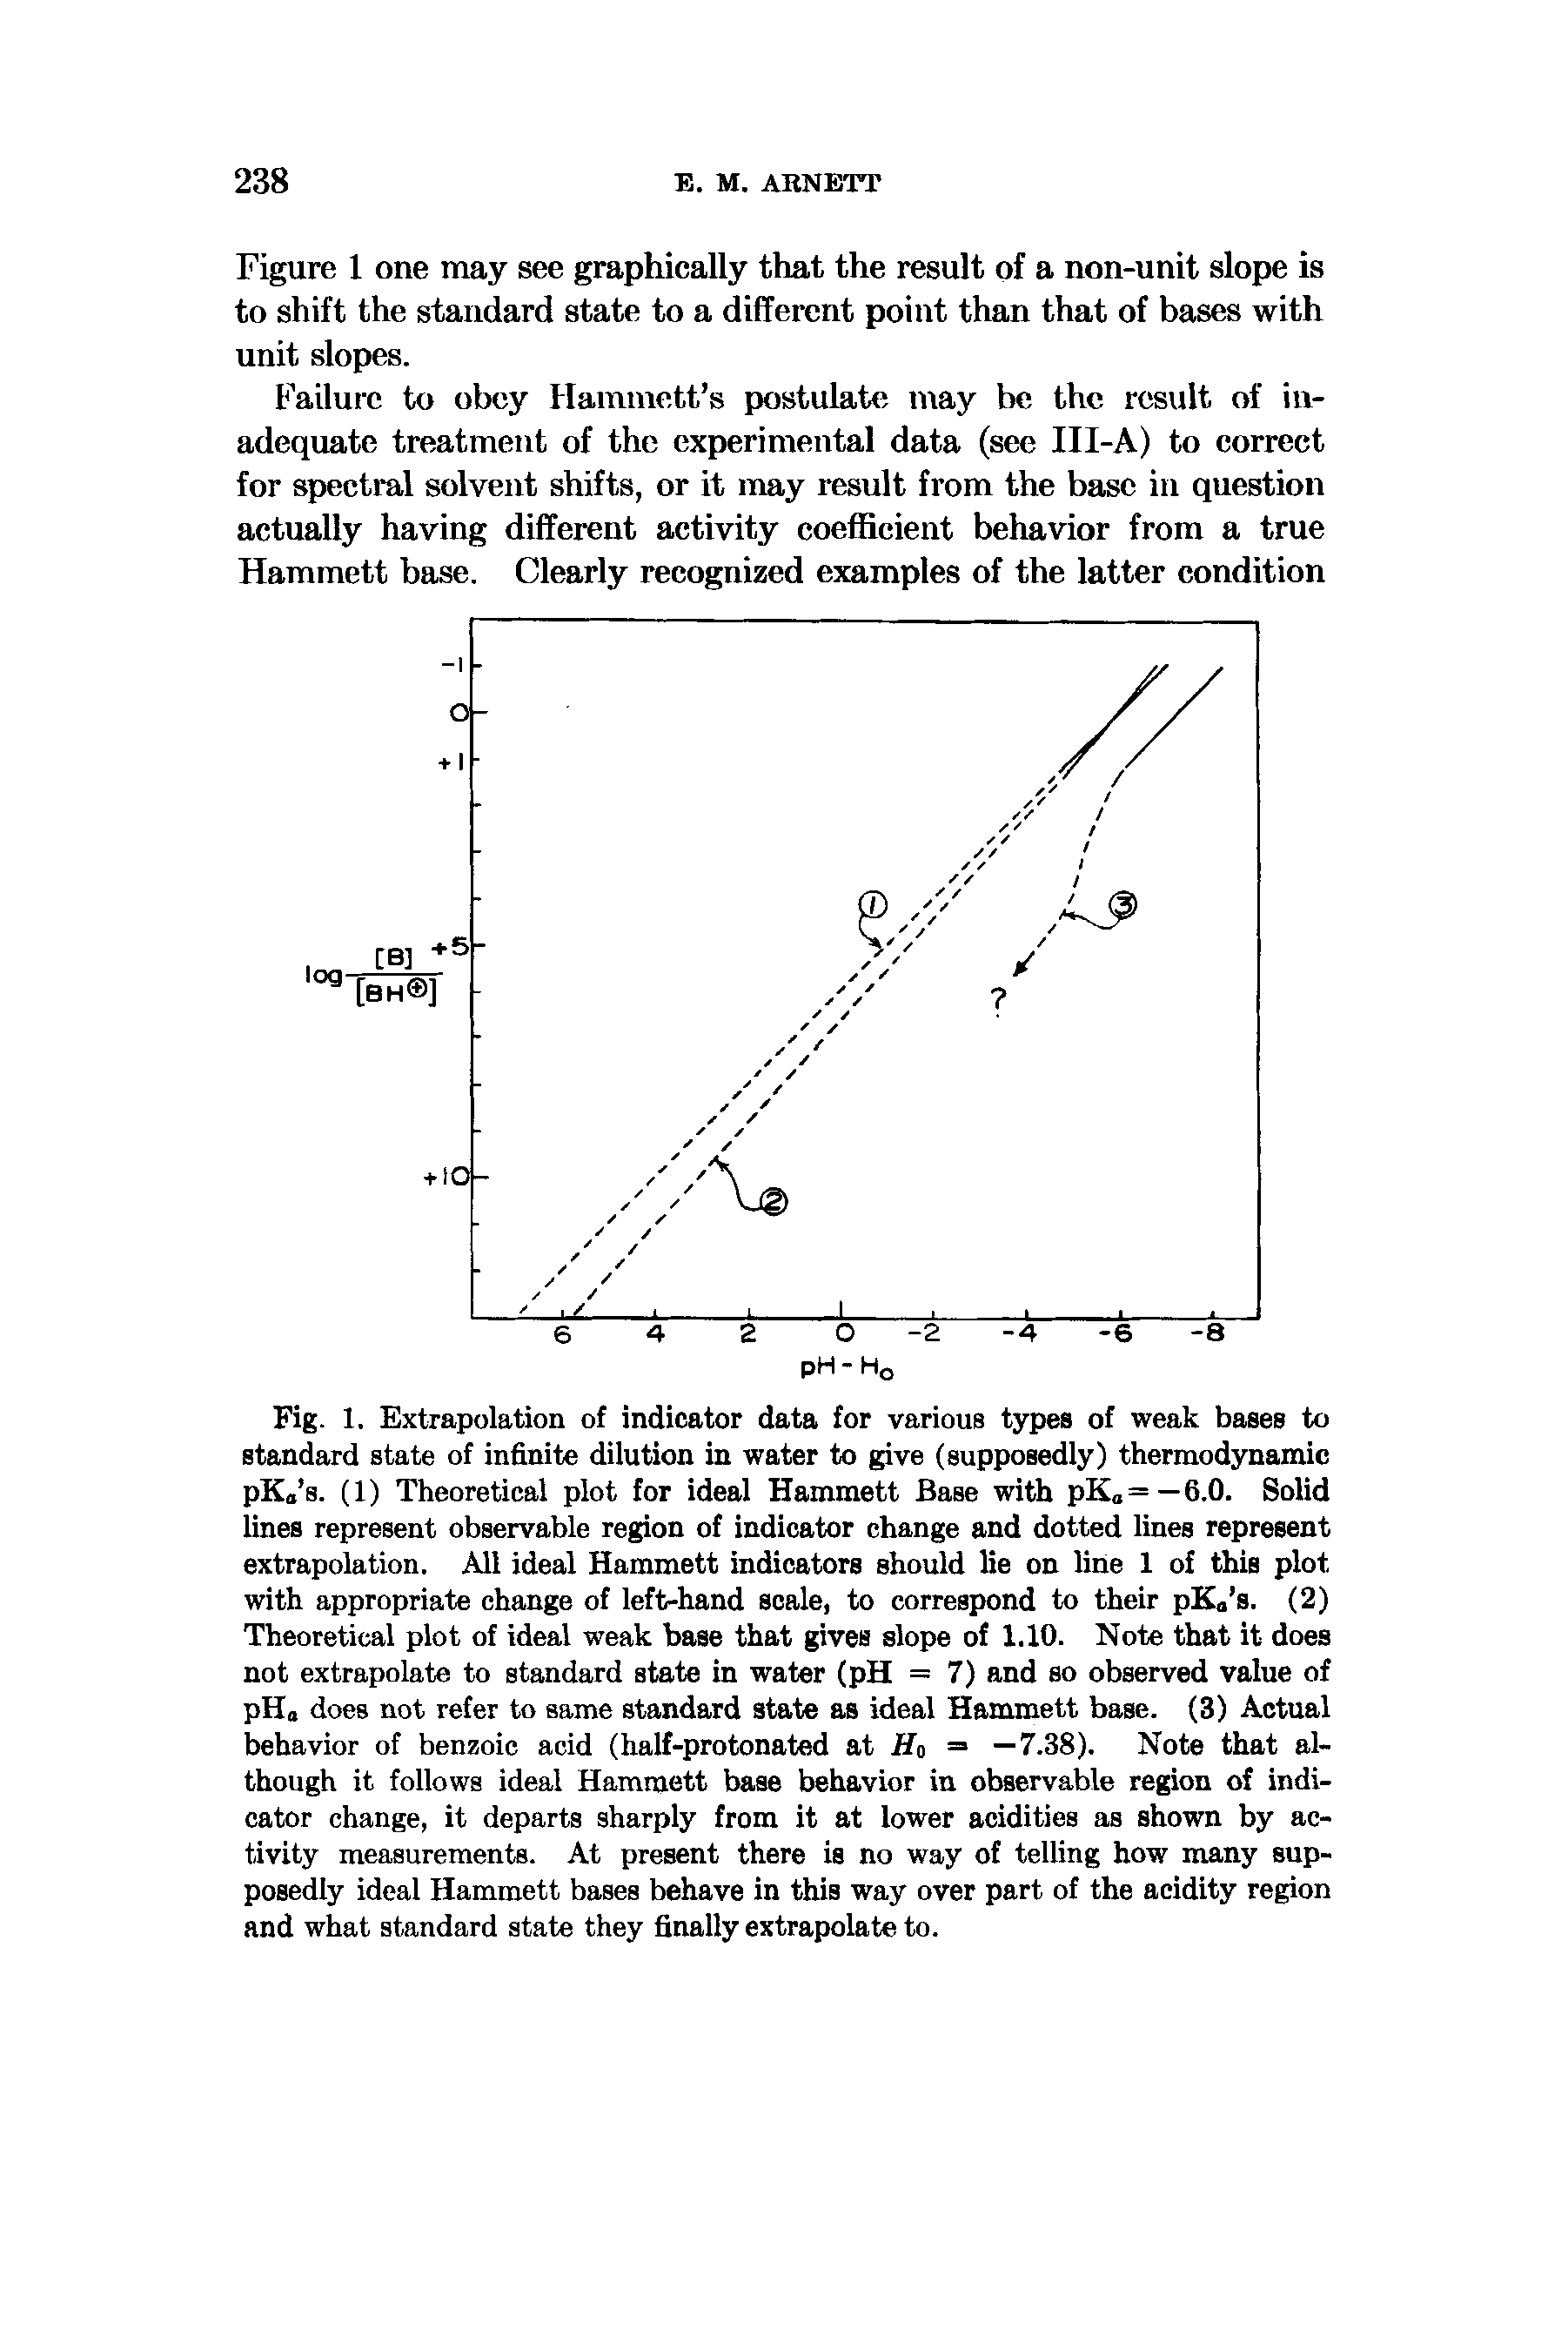 Fig. 1. Extrapolation of indicator data for various types of weak bases to standard state of infinite dilution in water to give (supposedly) thermodynamic pKa s. (1) Theoretical plot for ideal Hammett Base with pK =—6.0. Solid lines represent observable region of indicator change and dotted lines represent extrapolation. All ideal Hammett indicators should lie on line 1 of this plot with appropriate change of left-hand scale, to correspond to their pKa s. (2) Theoretical plot of ideal weak base that gives slope of 1.10. Note that it does not extrapolate to standard state in water (pH = 7) and so observed value of pHa does not refer to same standard state as ideal Hammett base. (3) Actual behavior of benzoic acid (half-protonated at Ht, = —7.38). Note that although it follows ideal Hammett base behavior in observable region of indicator change, it departs sharply from it at lower acidities as shown by activity measurements. At present there is no way of telling how many supposedly ideal Hammett bases behave in this way over part of the acidity region and what standard state they finally extrapolate to.